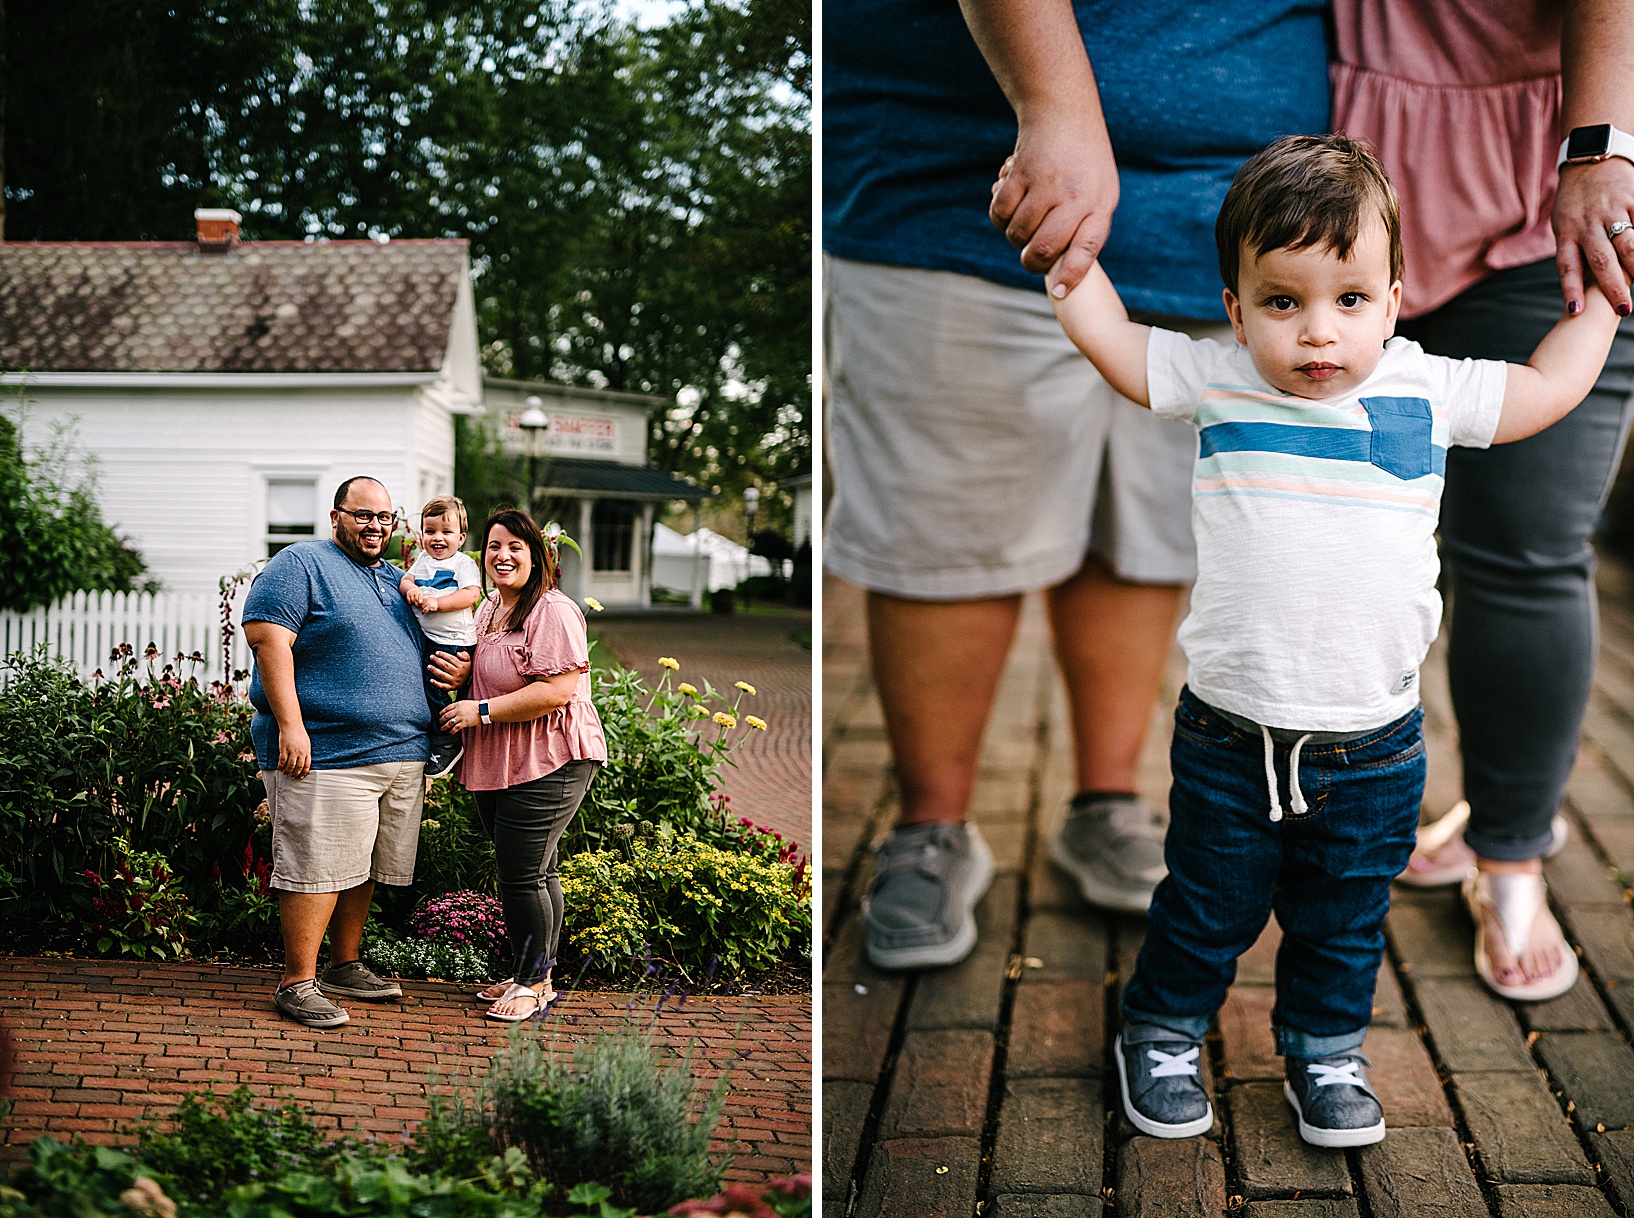 Young son stands on a brick pathway in front of his parents while they hold his hands in the background